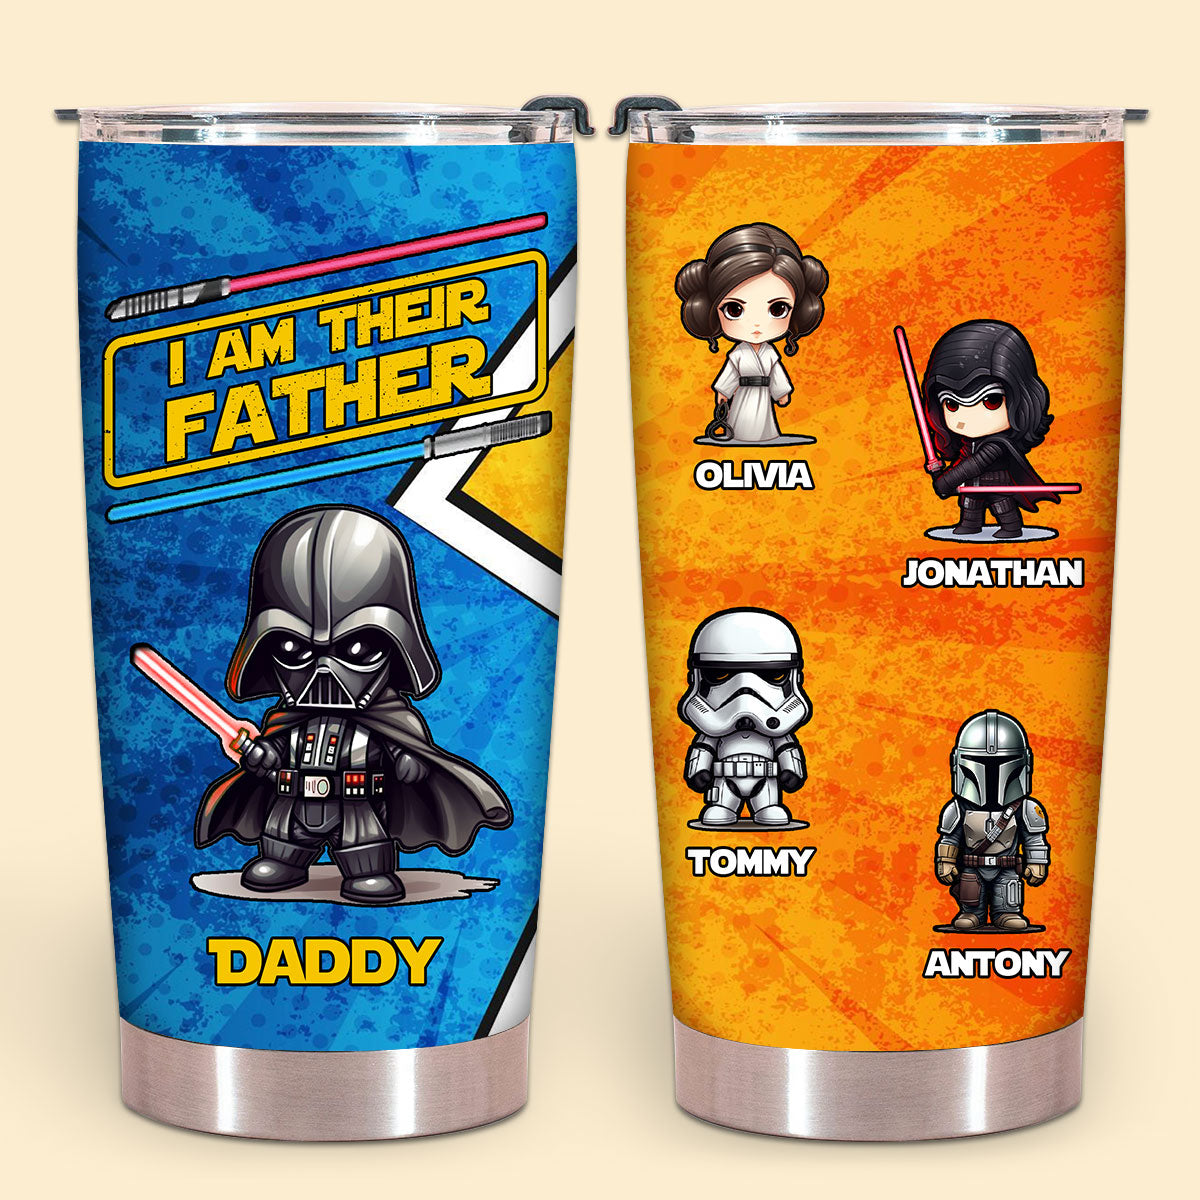 Personalized Tumbler Cups - I Am Their Father - Personalized Tumbler Gift For Dad, Father's Day, Birthday, Anniversary